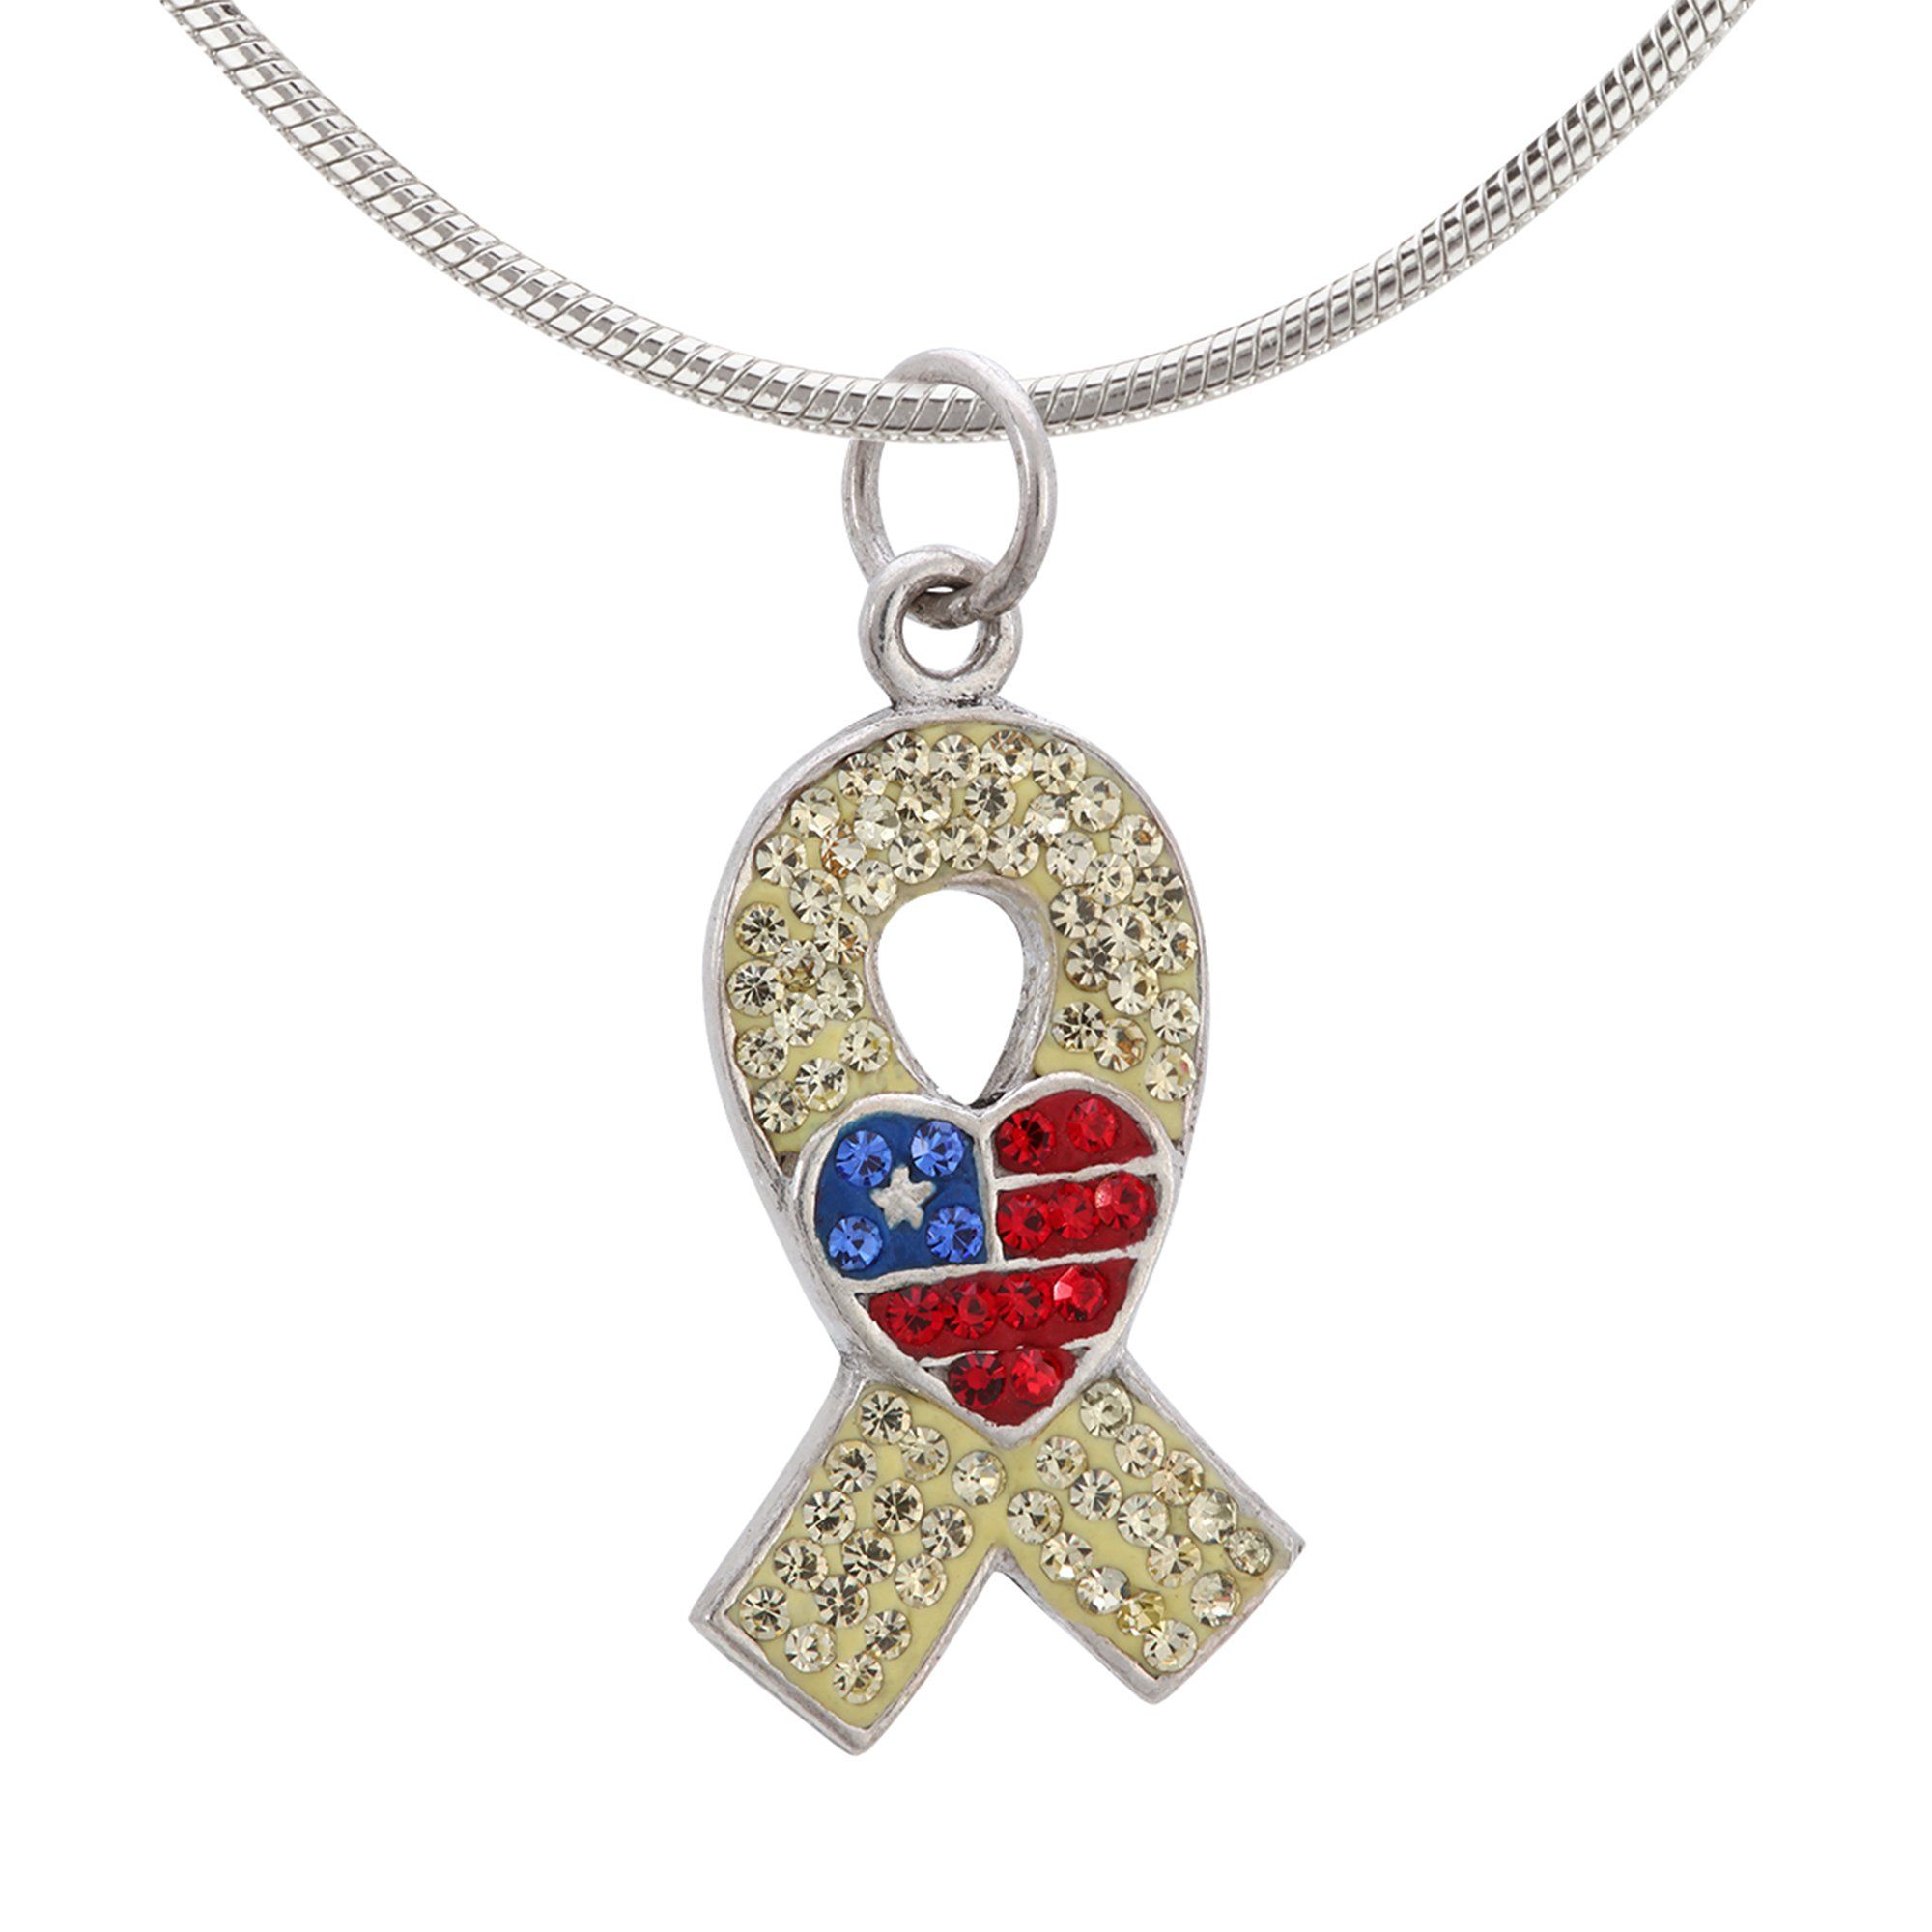 American Heart Yellow Ribbon Crystal & Sterling Necklace - With Snake Chain